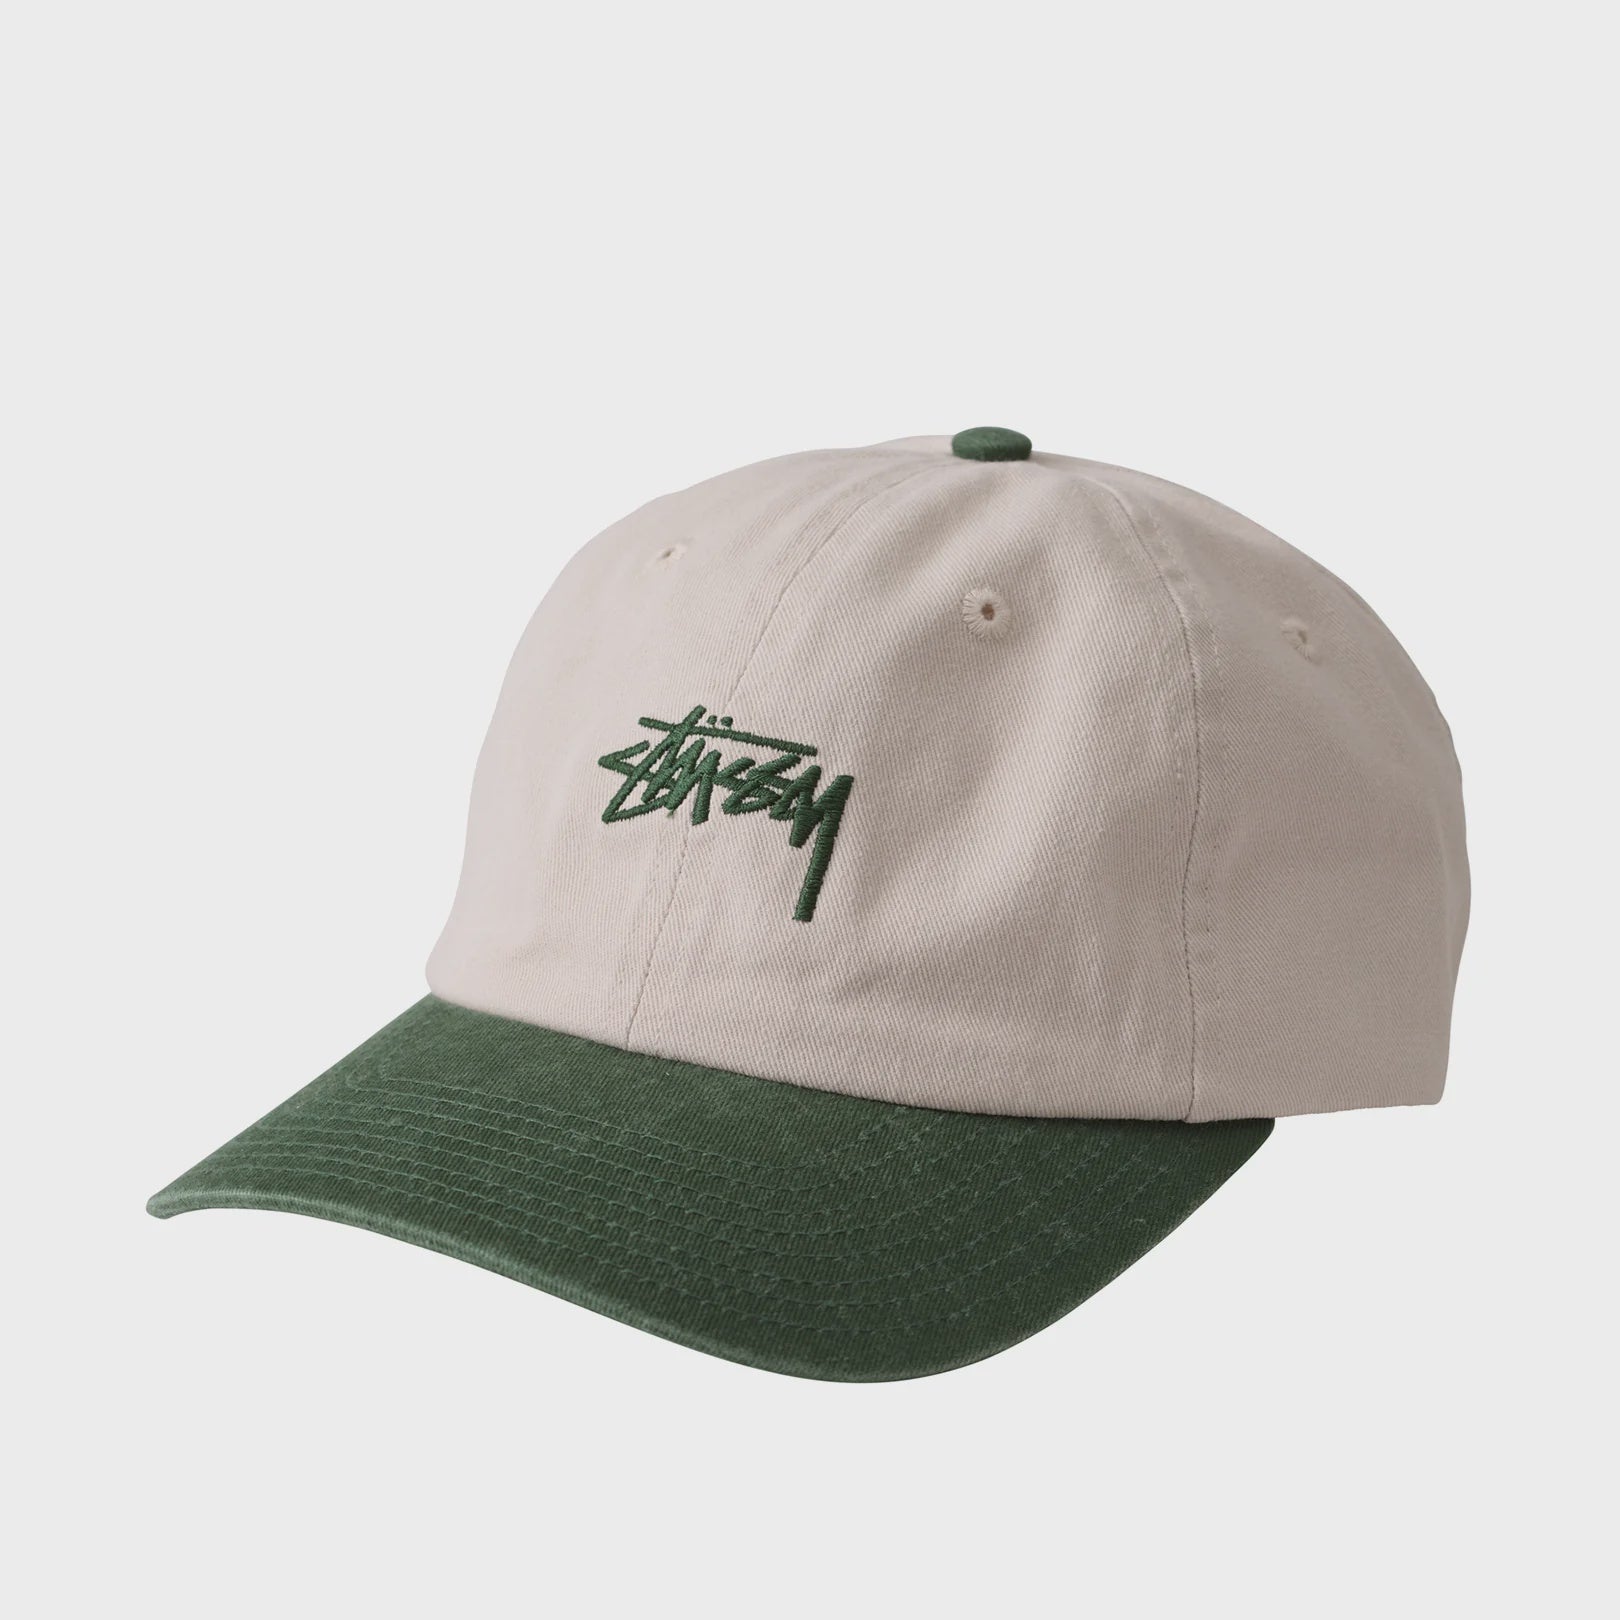 Stussy stock low pro cap winter white/forest